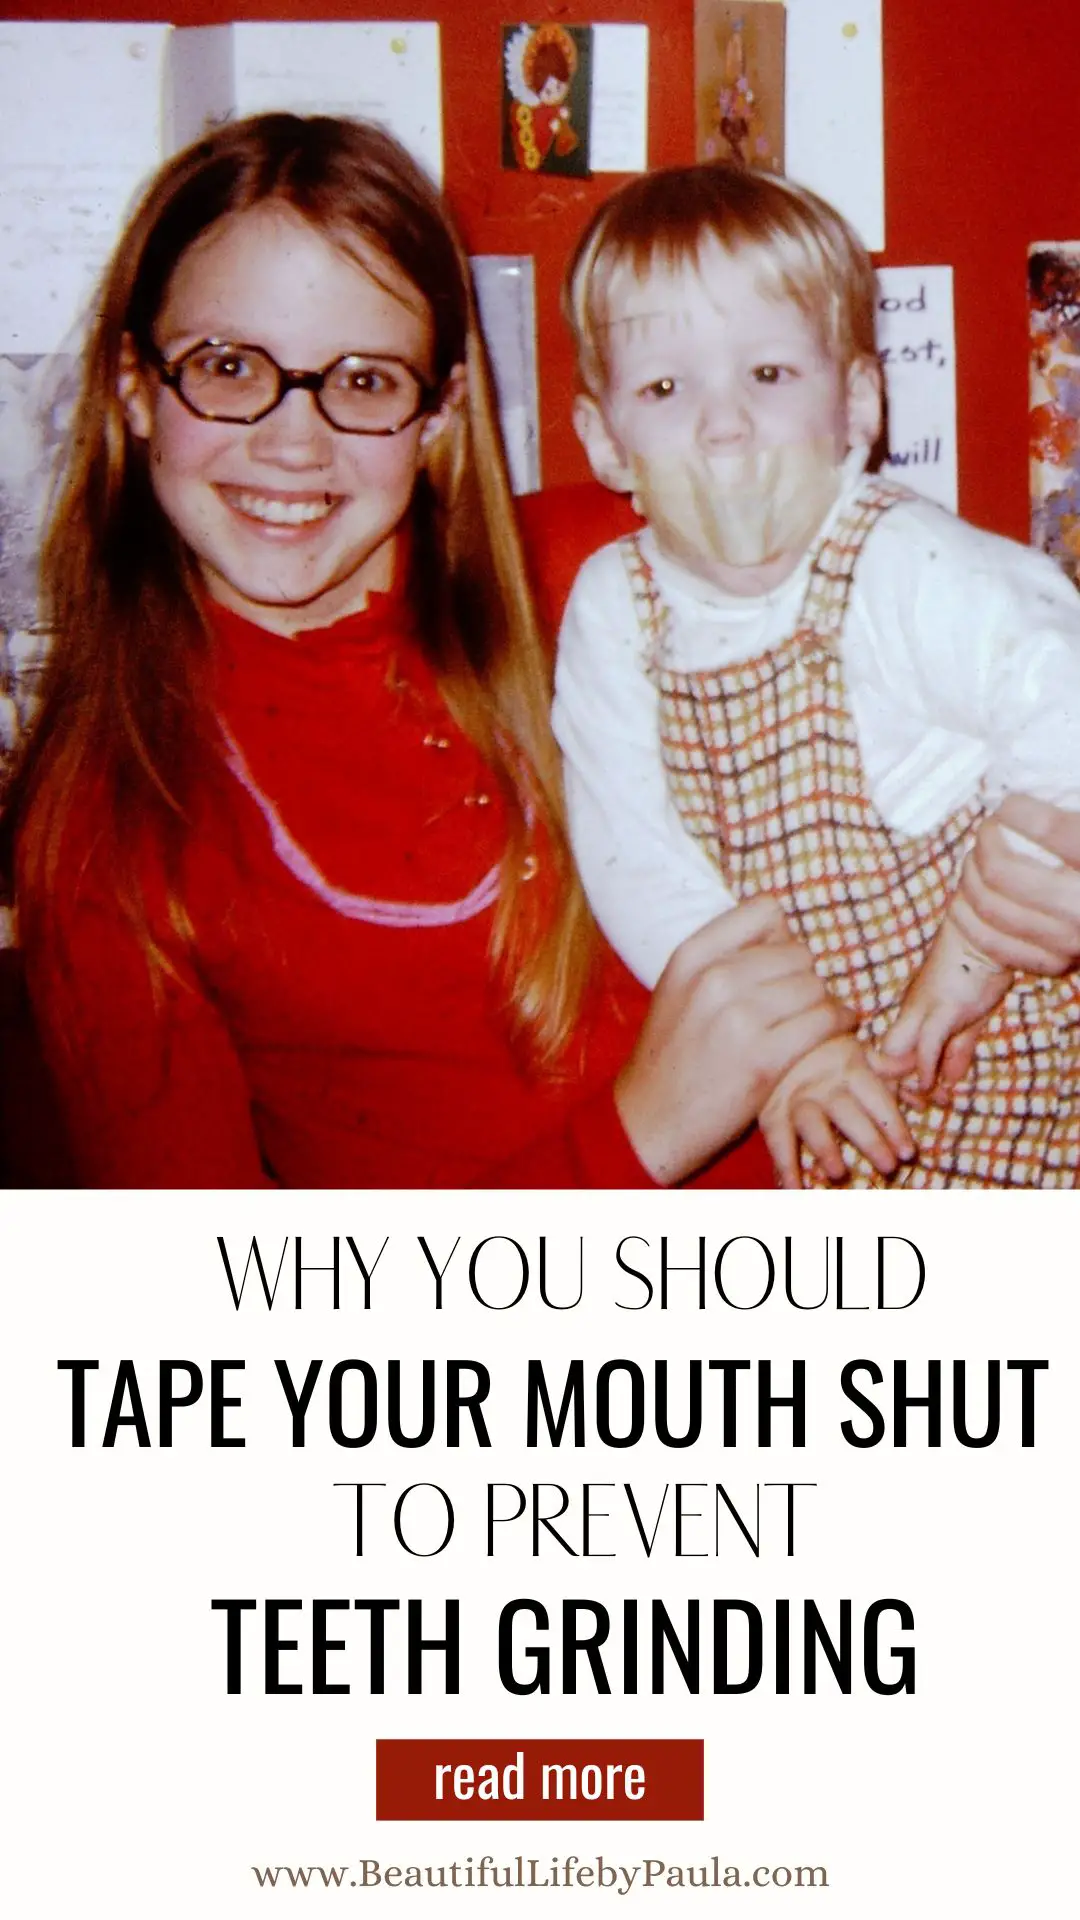 why you should tape your mouth shut to prevent teeth grinding